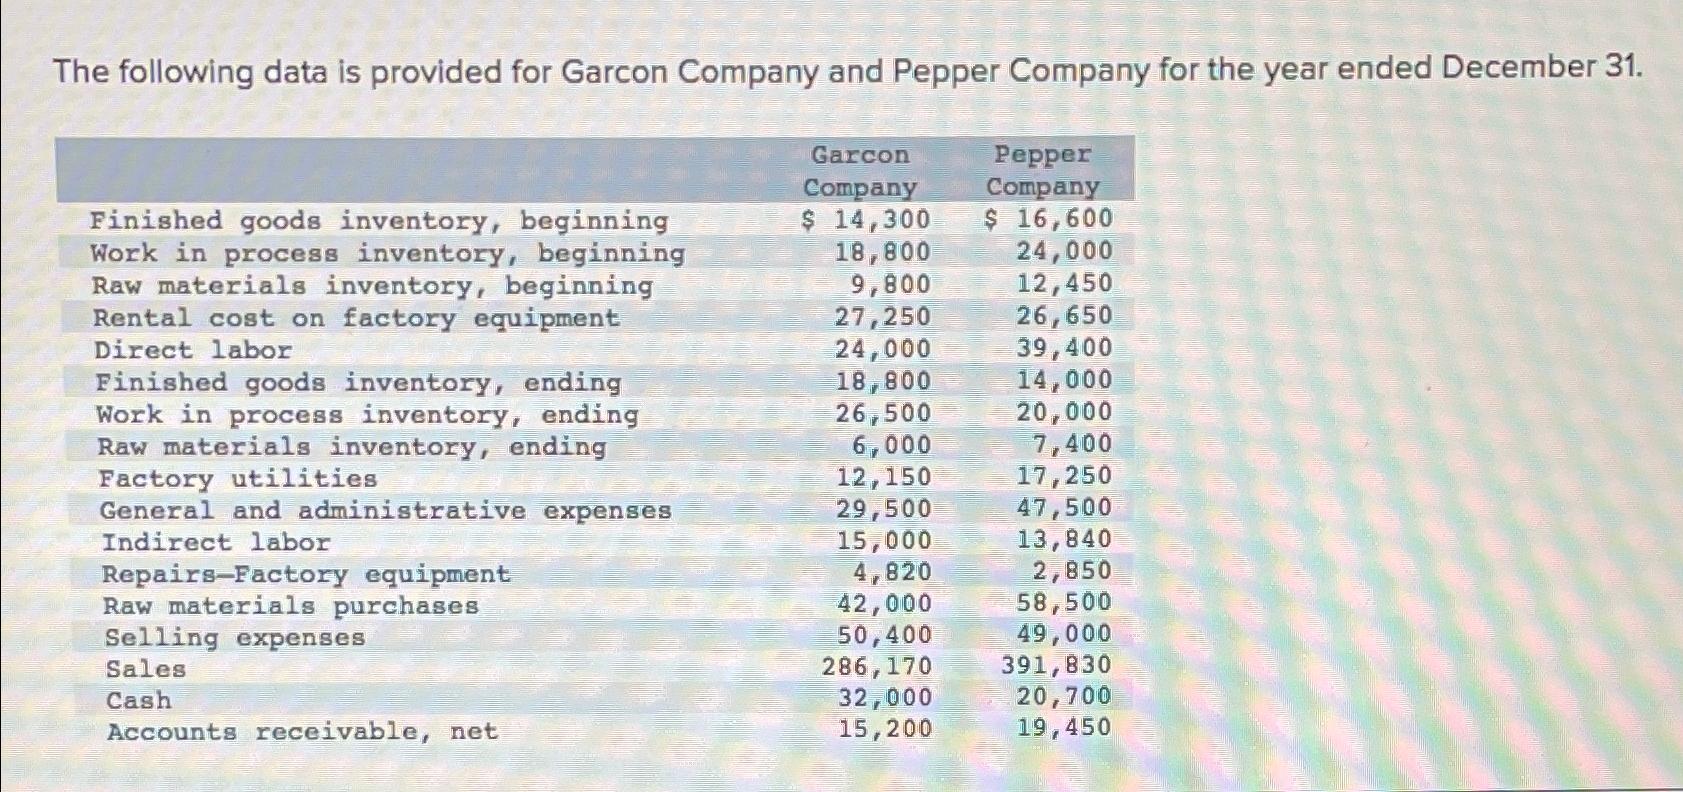 The following data is provided for Garcon Company and Pepper Company for the year ended December 31. Garcon